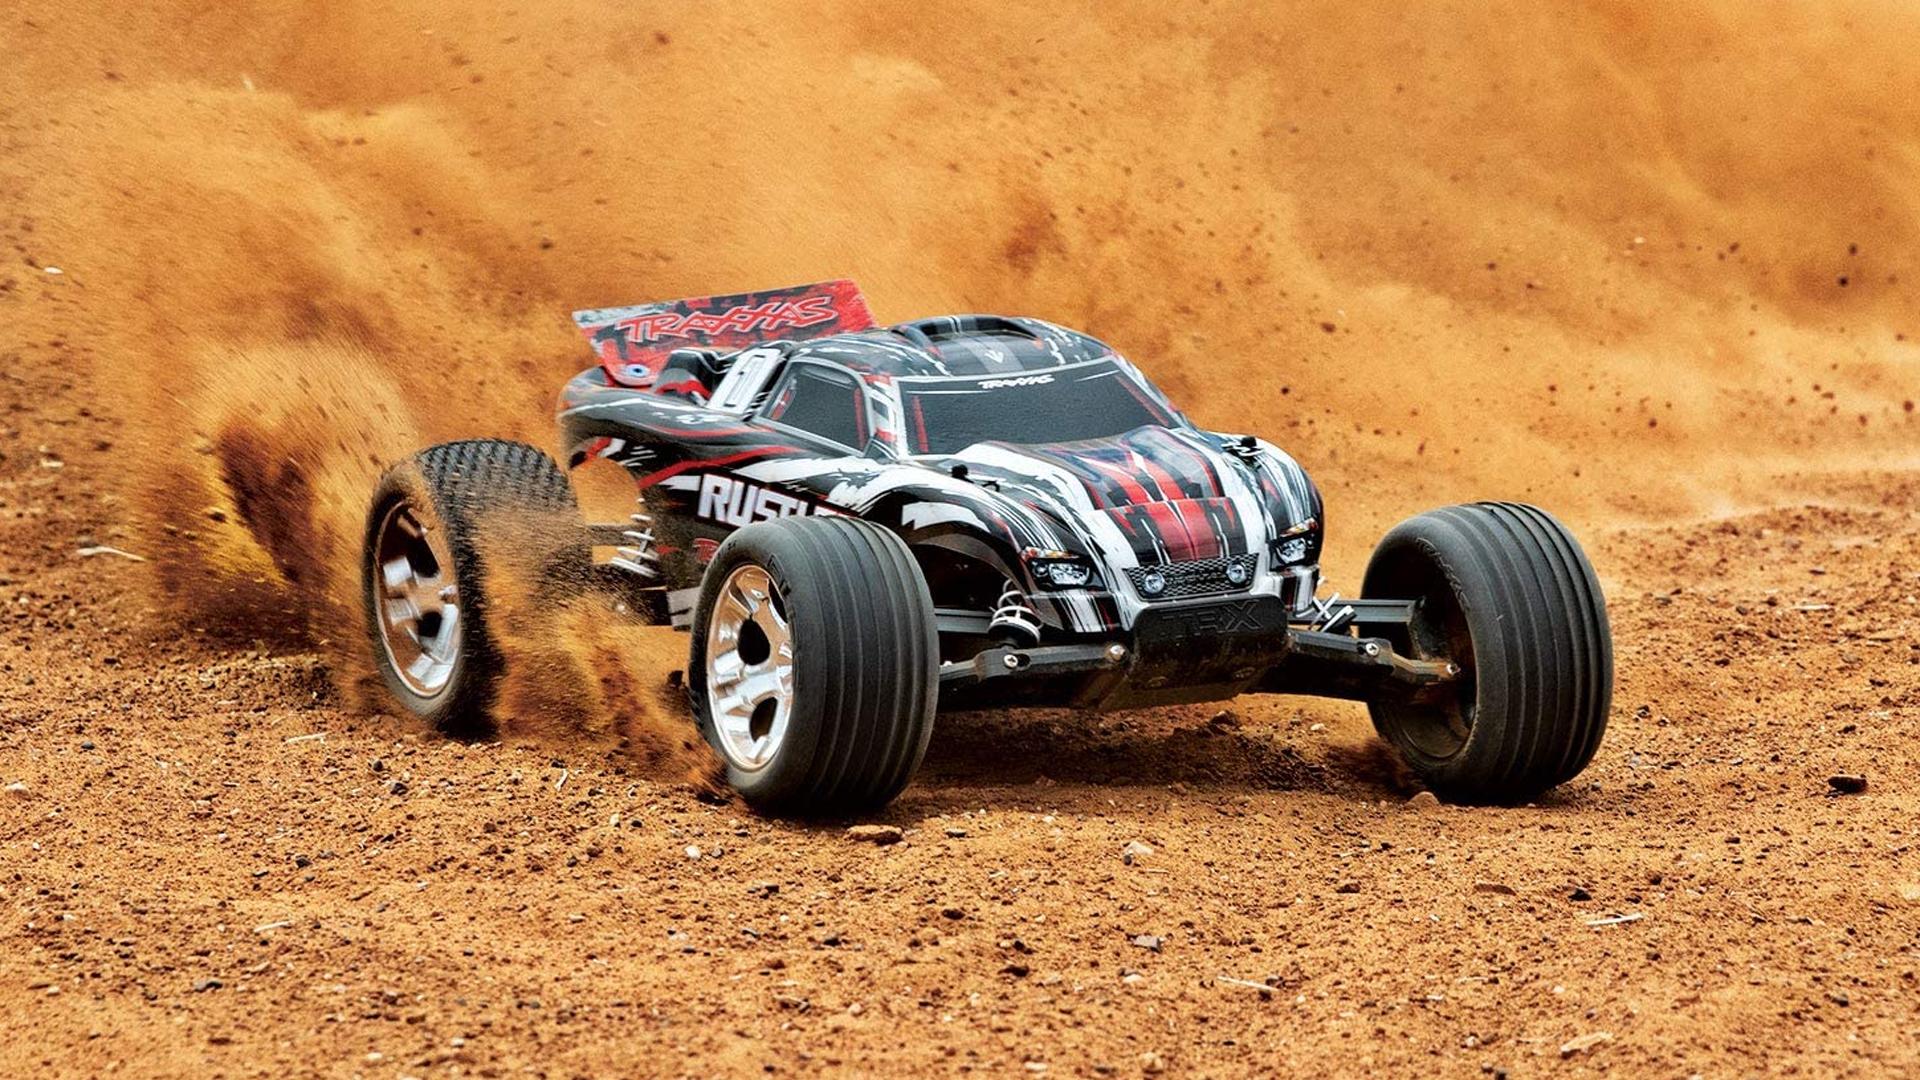 Fastest Rc Car In The World 2022: Top 2022 RC Cars and Their Speed-Boosting Factors